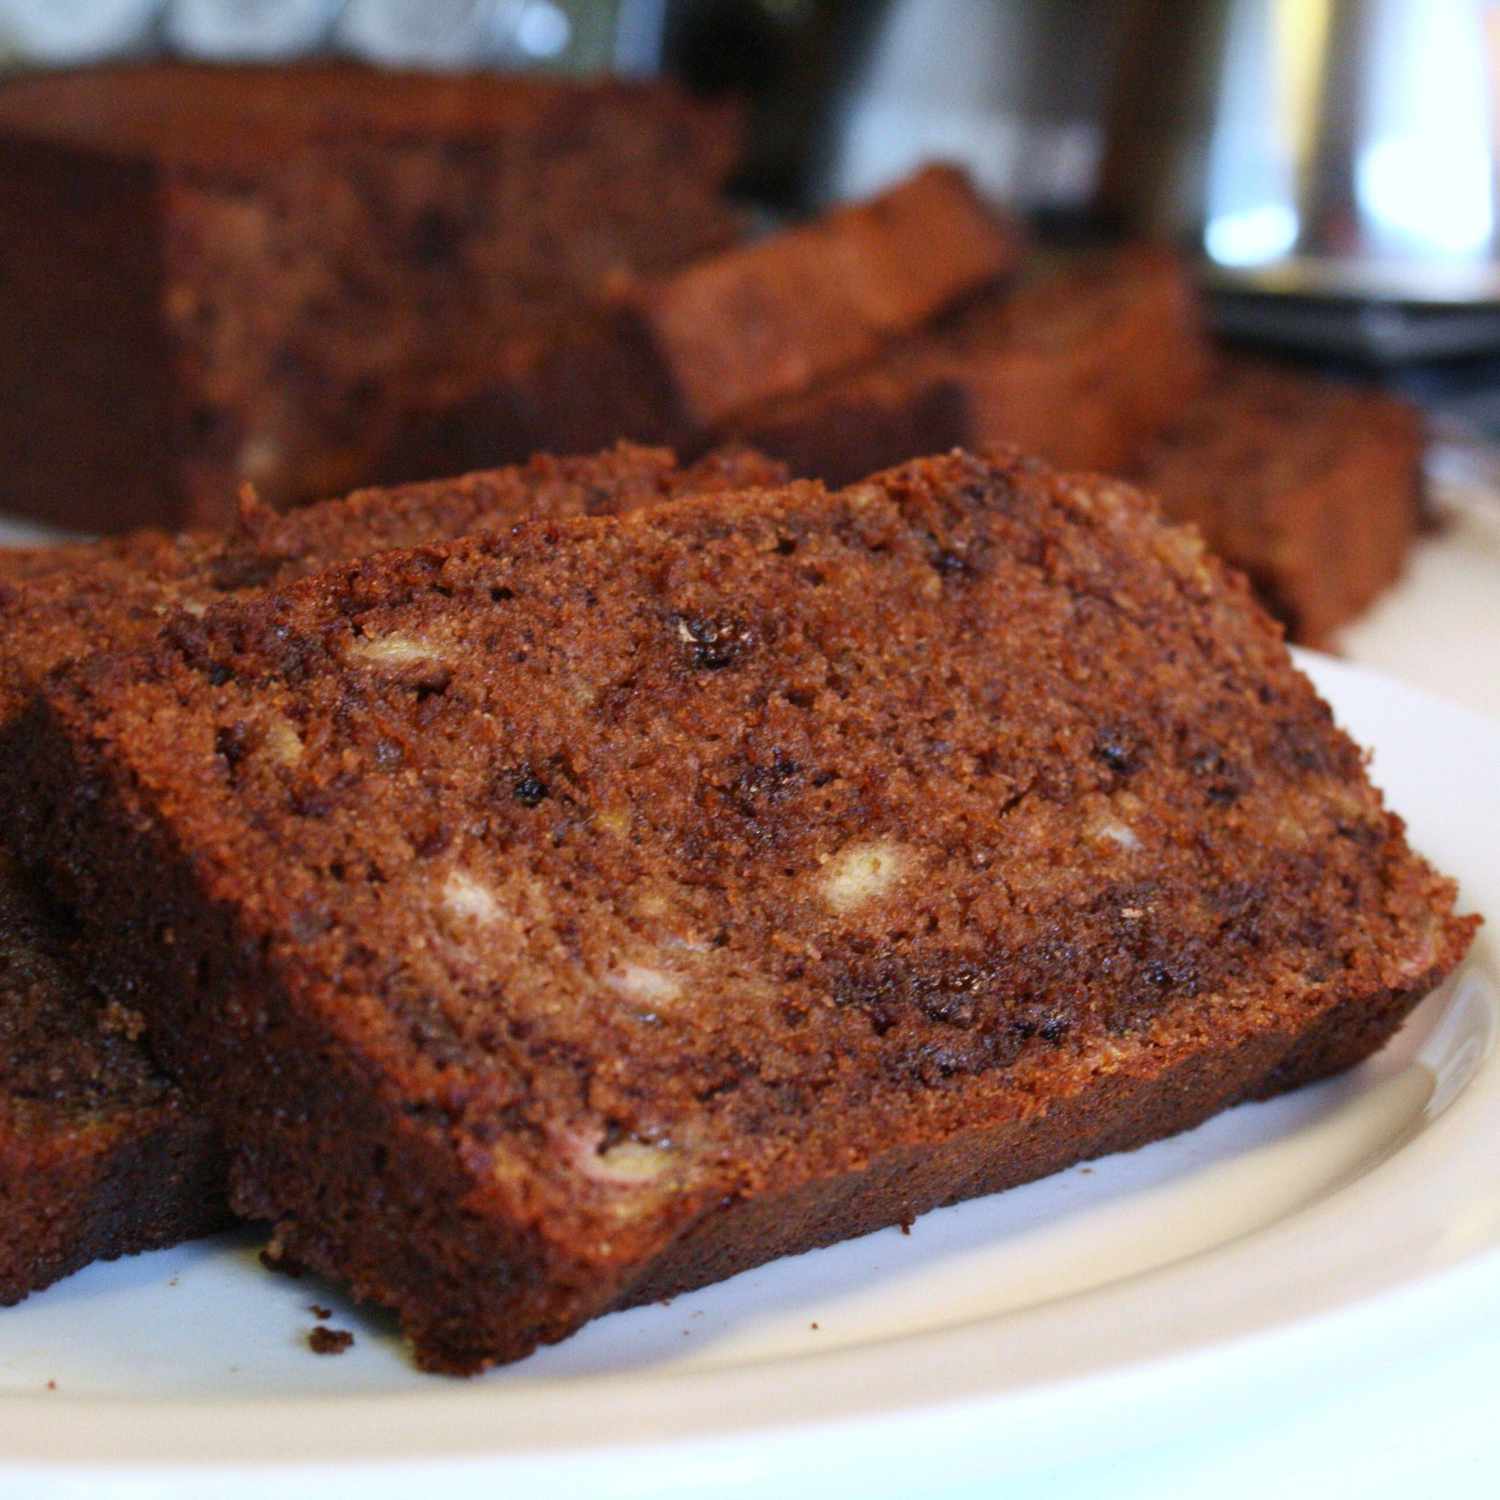 close up view of slices of dark brown banana bread made with cocoa powder and chocolate chips on a white platter